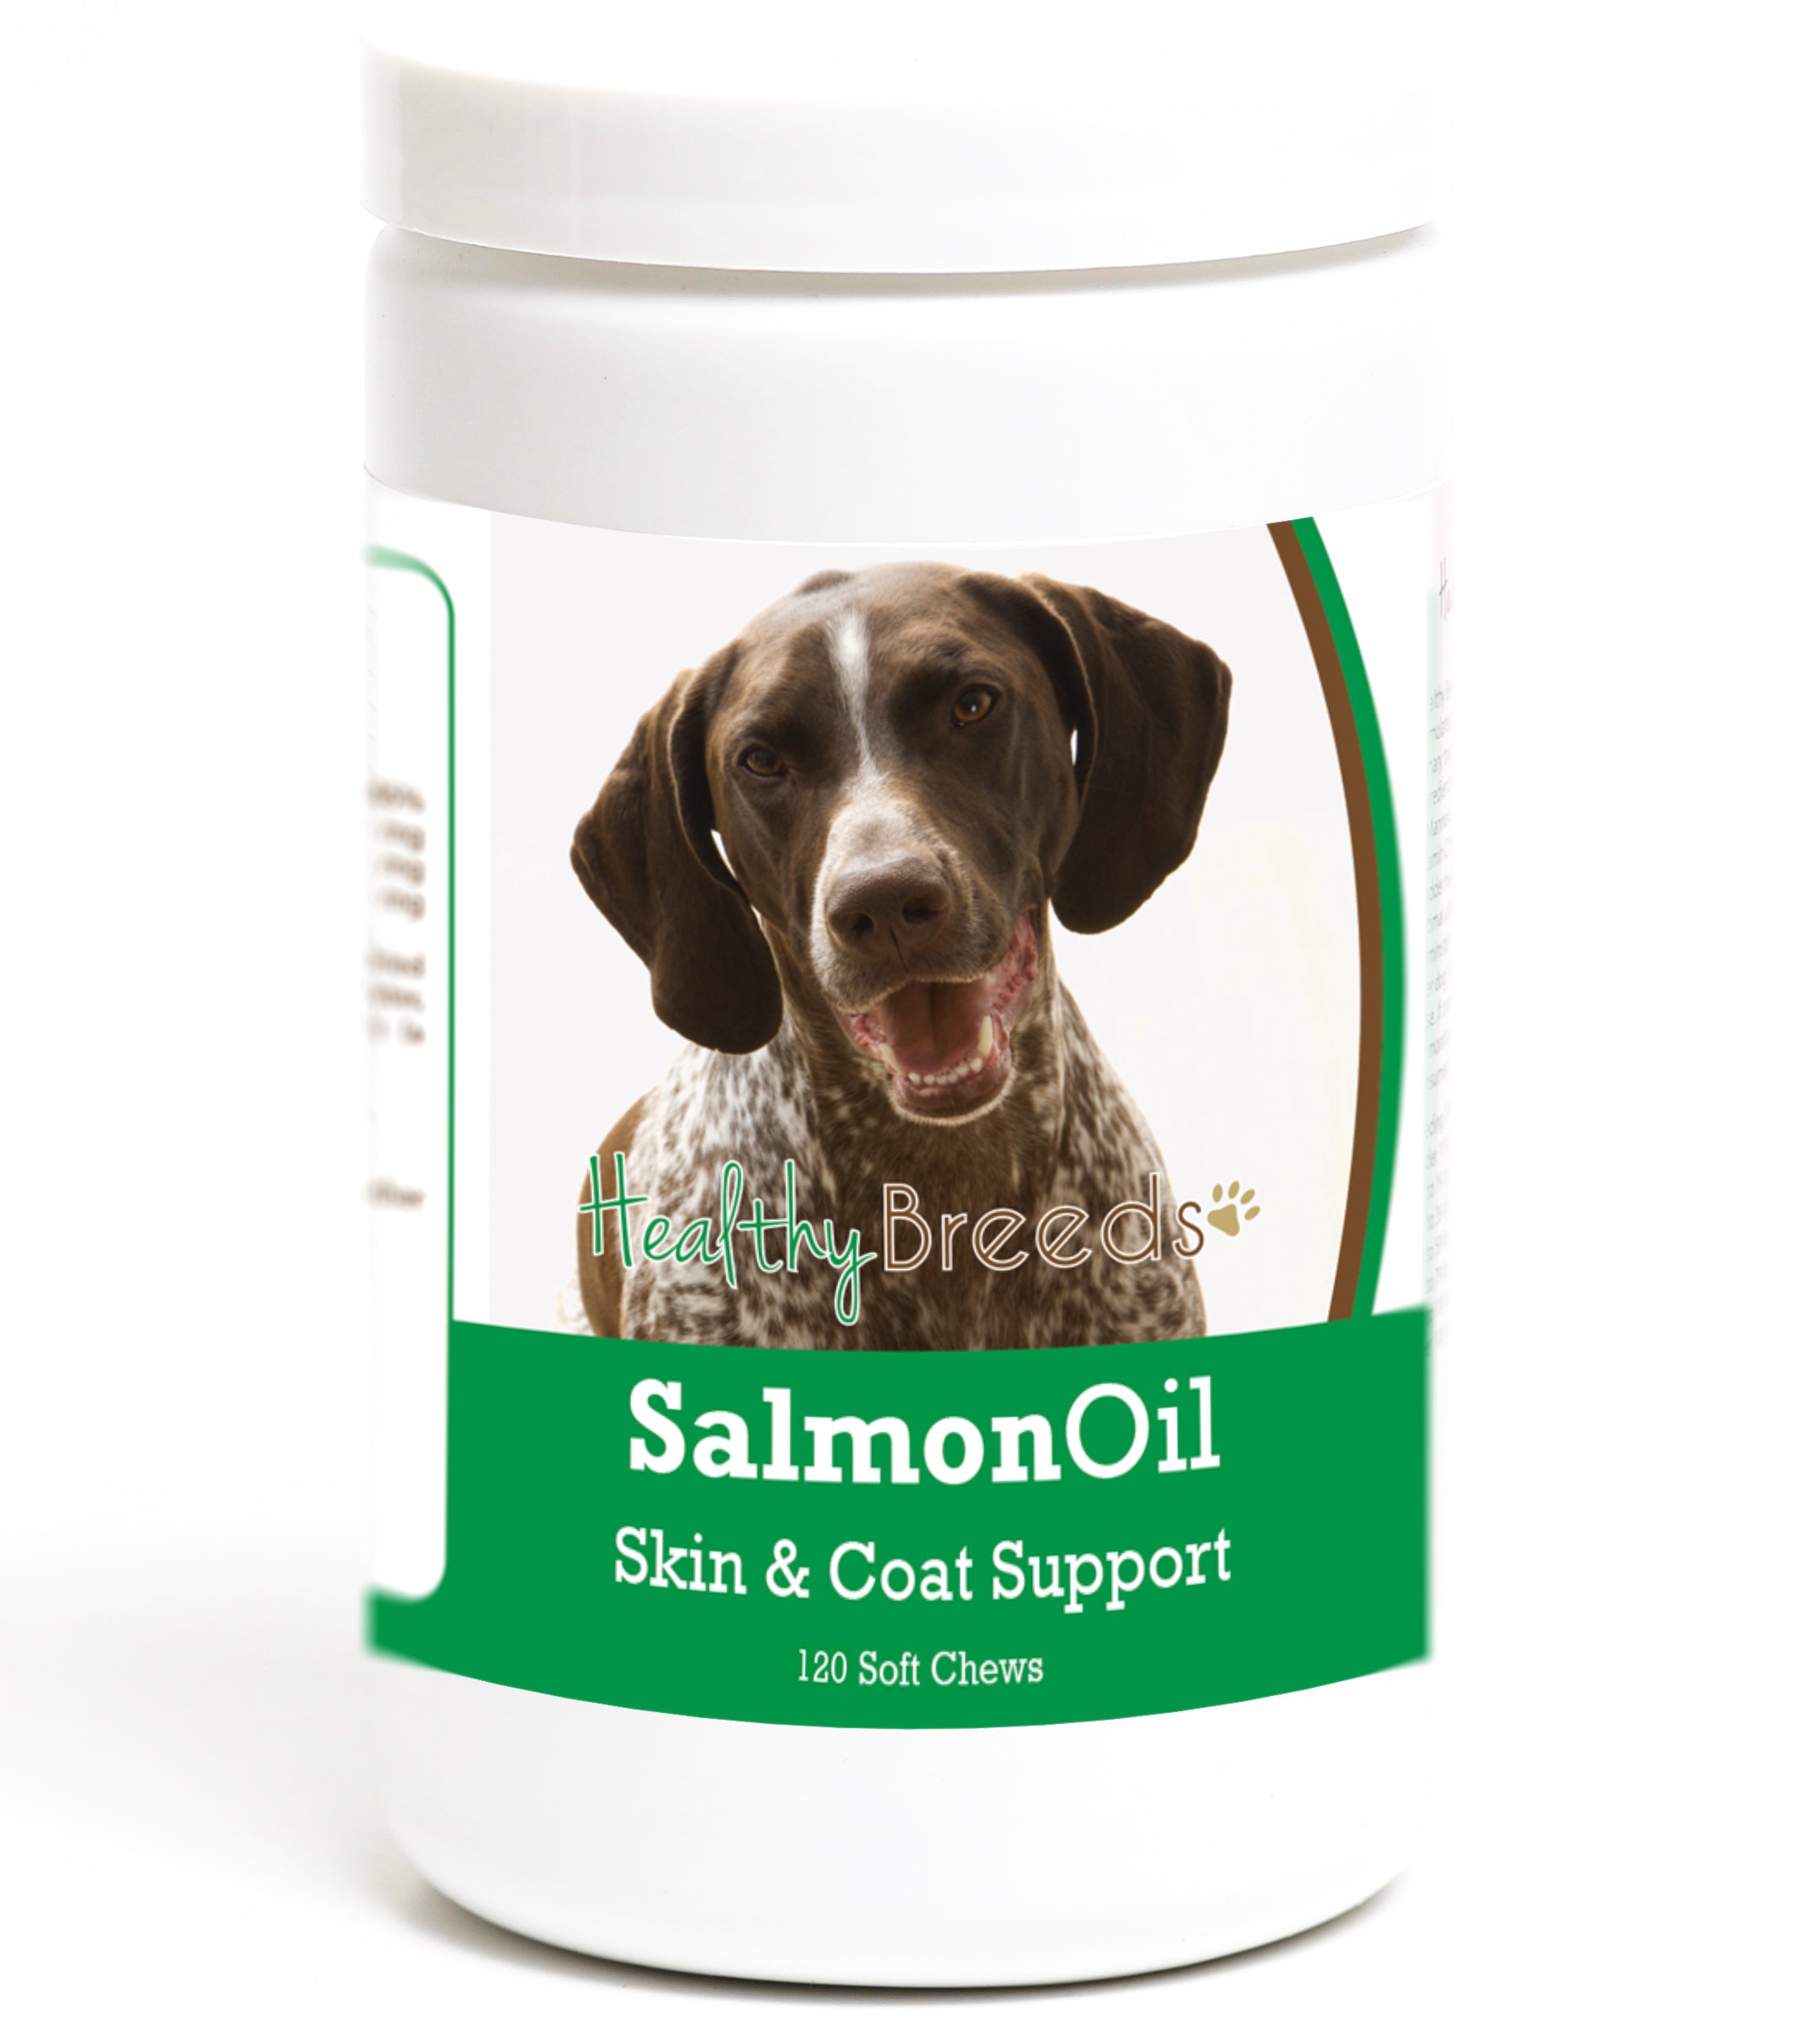 German Shorthaired Pointer Salmon Oil Soft Chews 120 Count